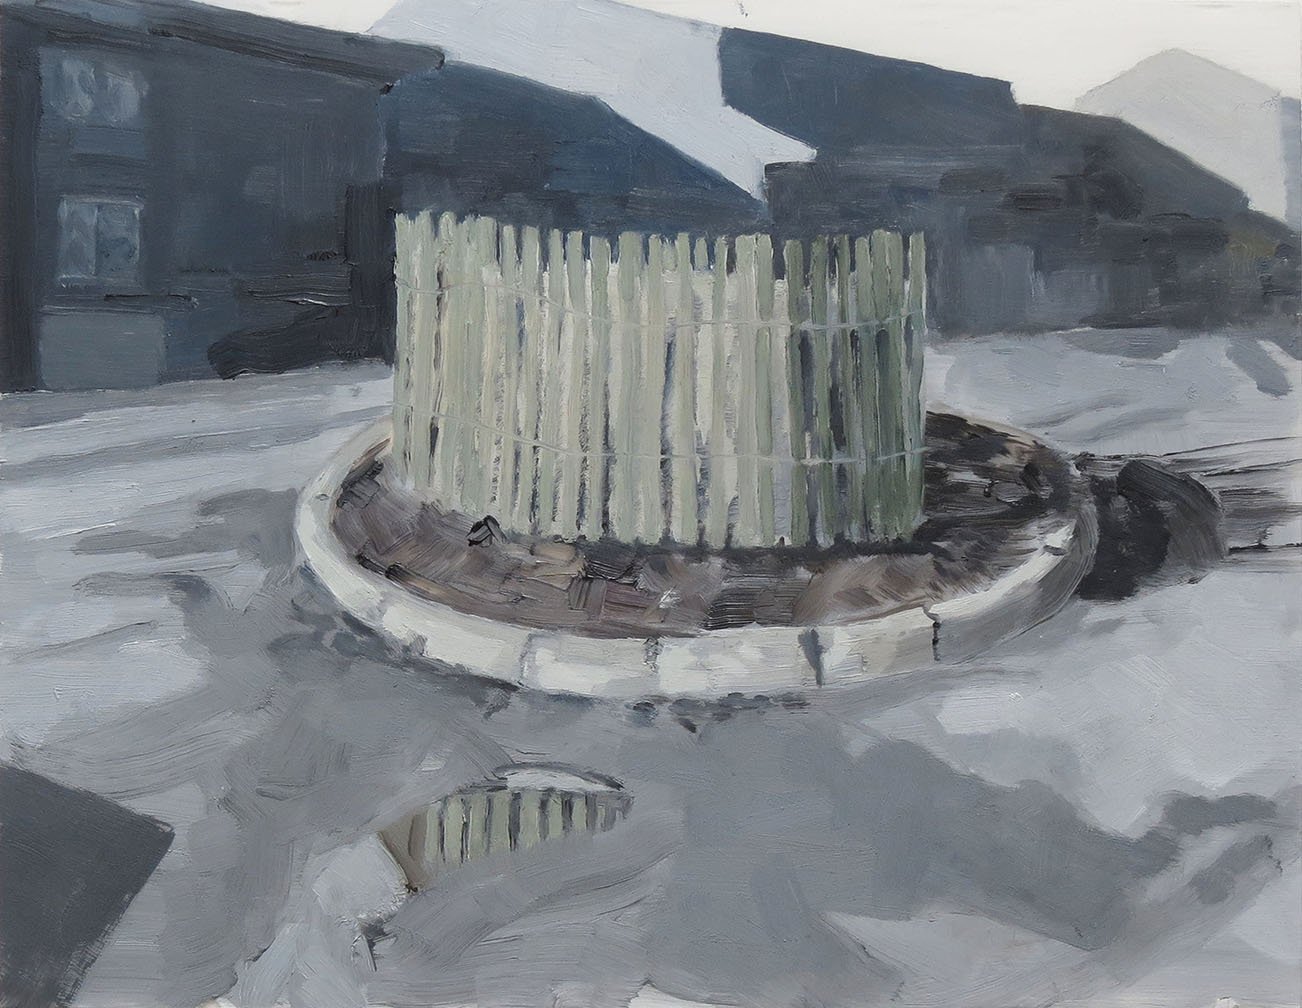  Roundabout, 2020, oil on plexiglas, 12 x 16 inches 